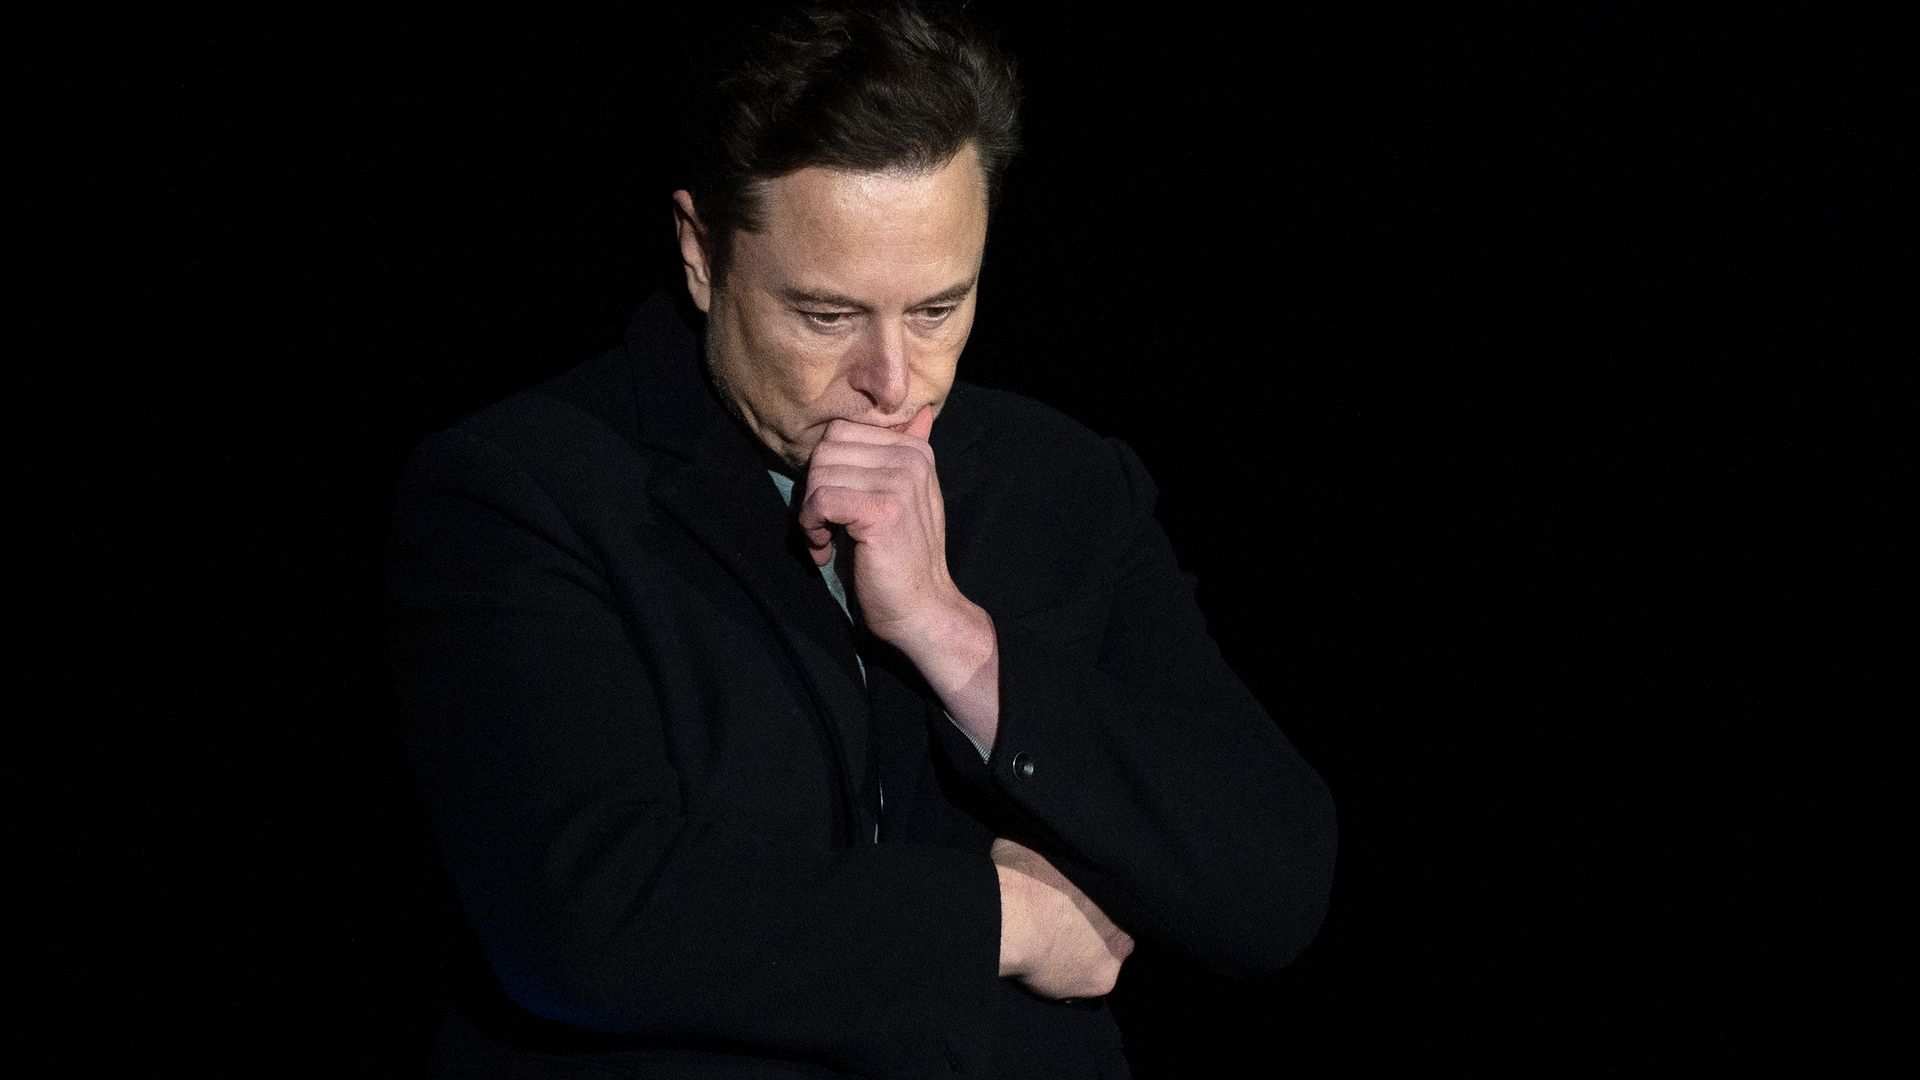 Elon Musk during a press conference in Texas in February 2020.